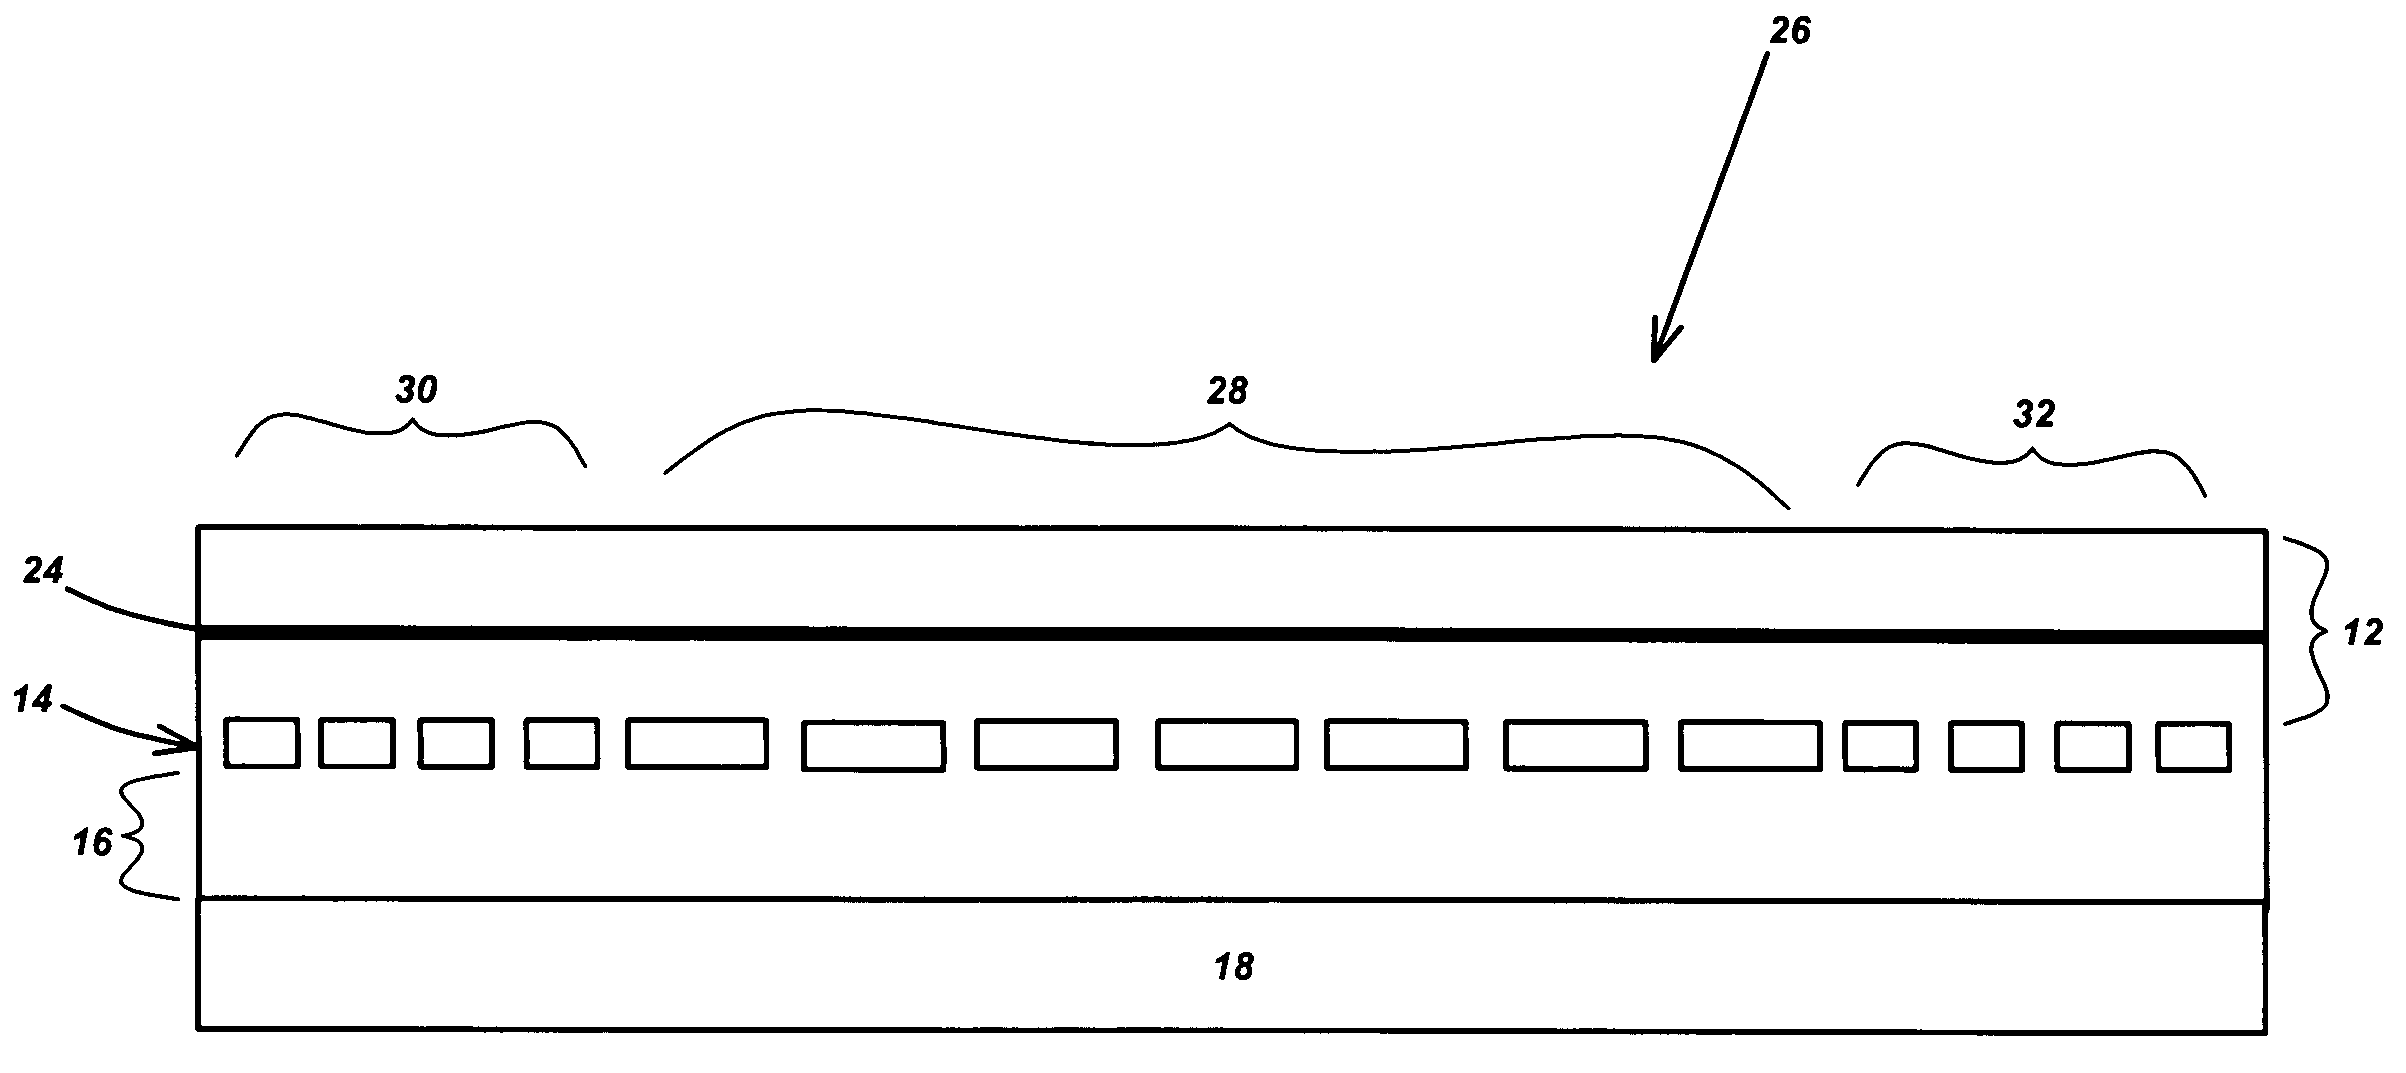 Horizontal emitting, vertical emitting, beam shaped, distributed feedback (DFB) lasers by growth over a patterned substrate